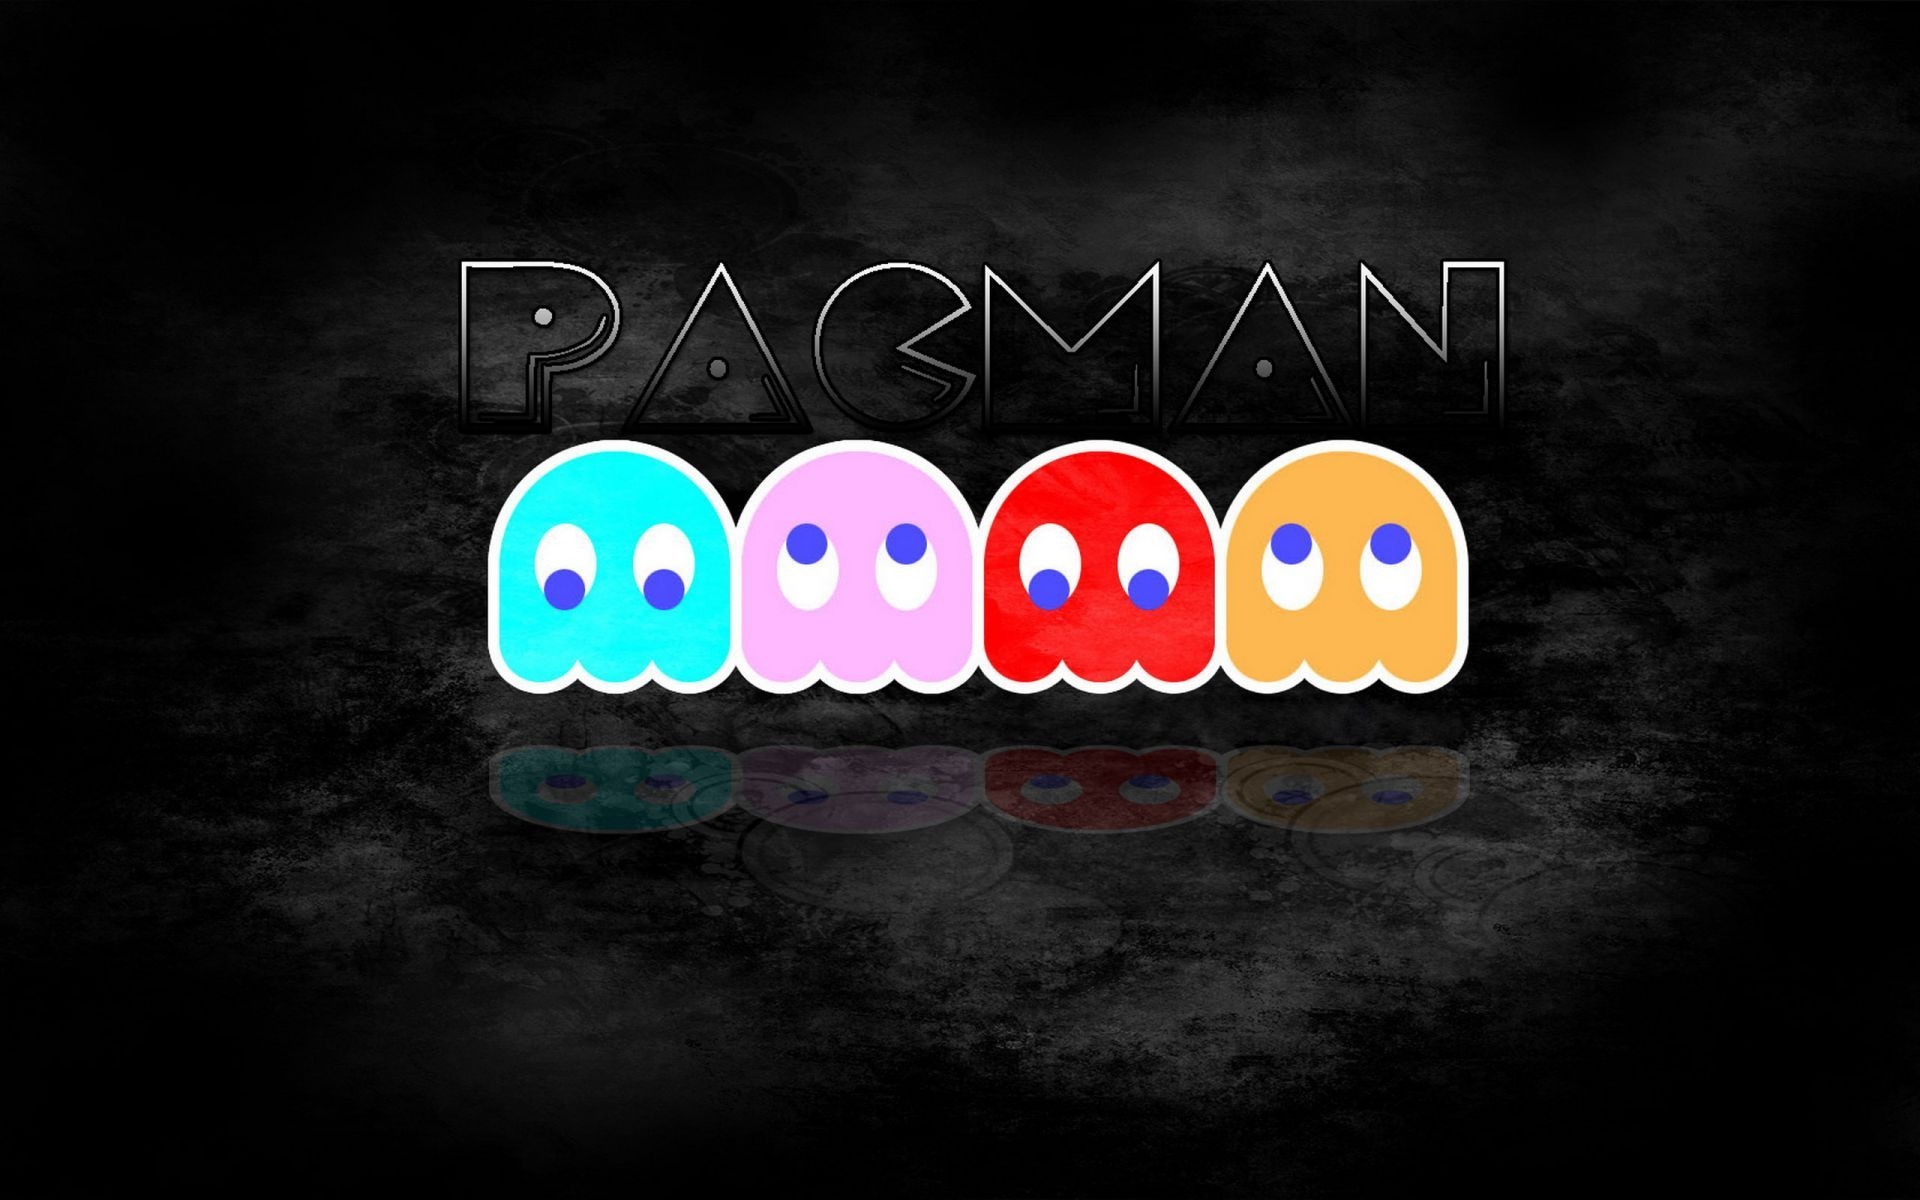 1920x1200 Ghosts of Pacman | Pacman, Wallpaper, Pacman ghost